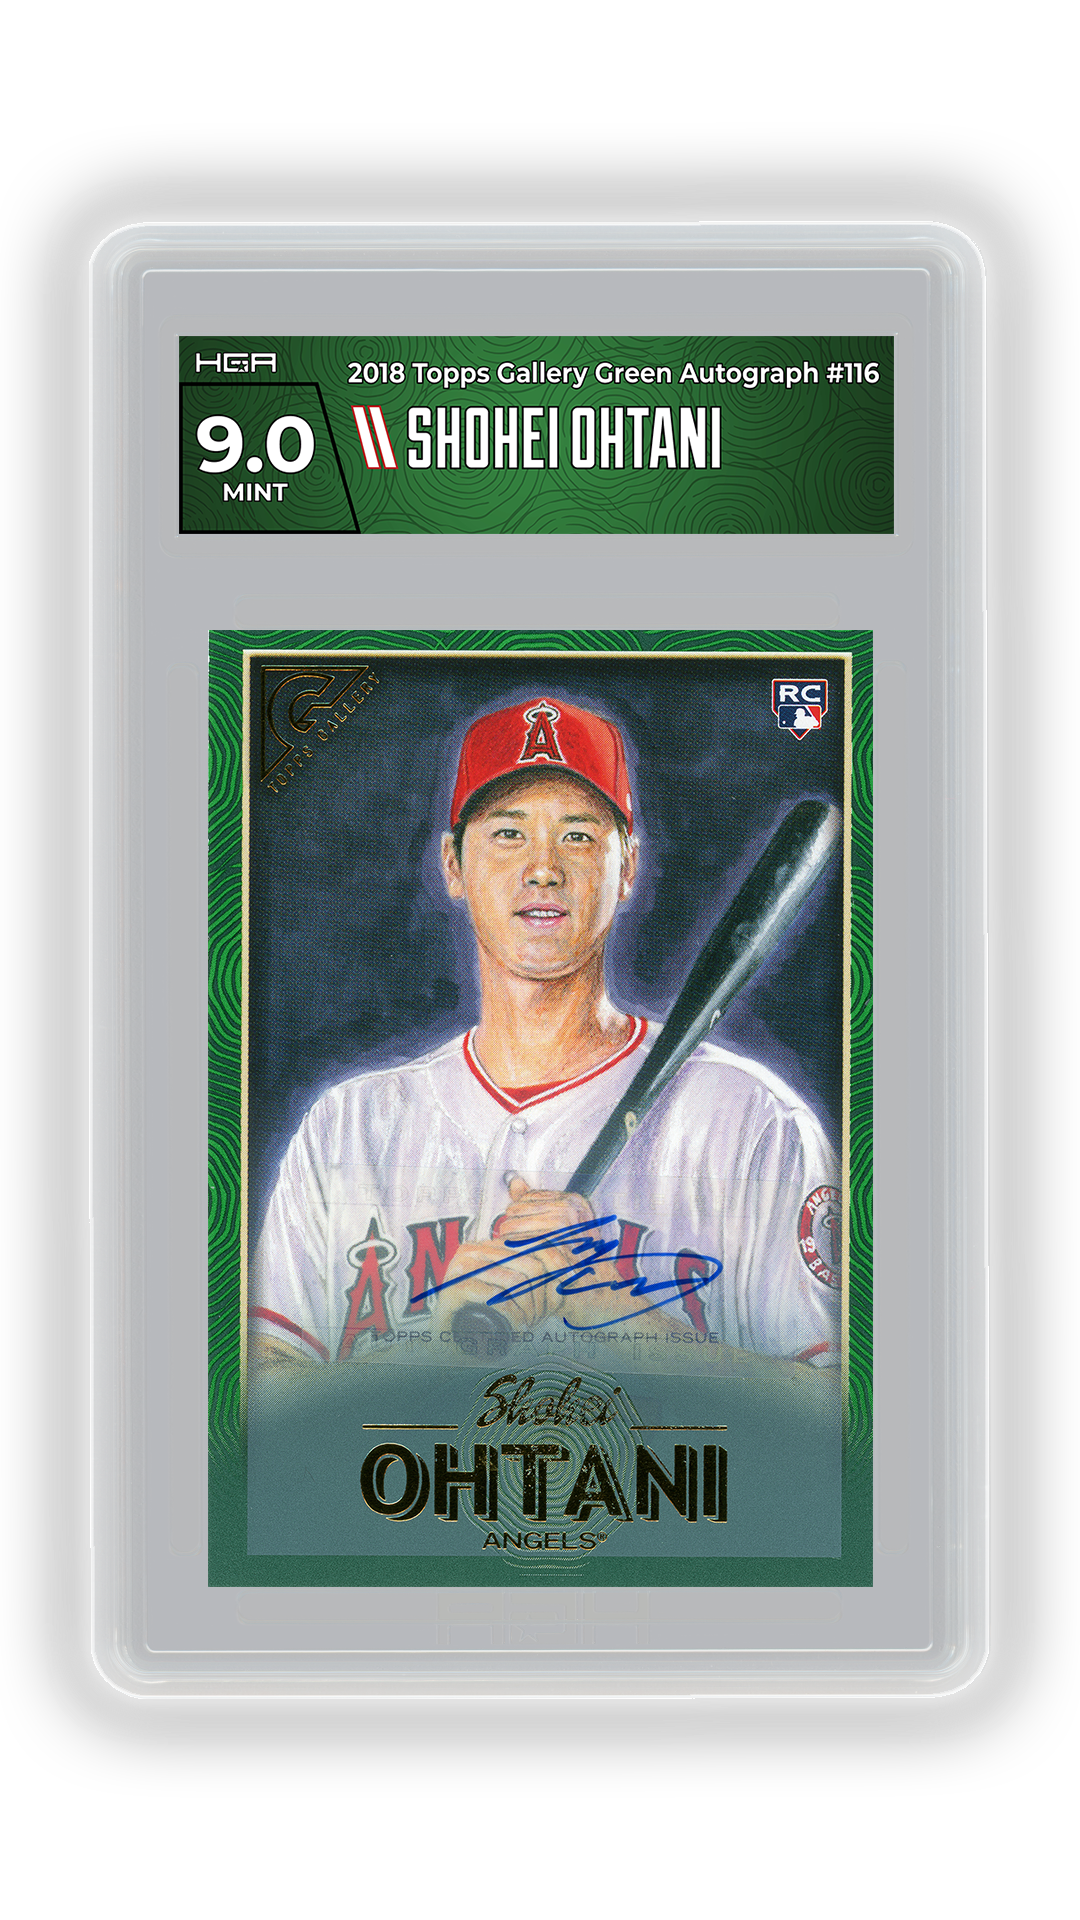 Importance of Grading Topps Cards